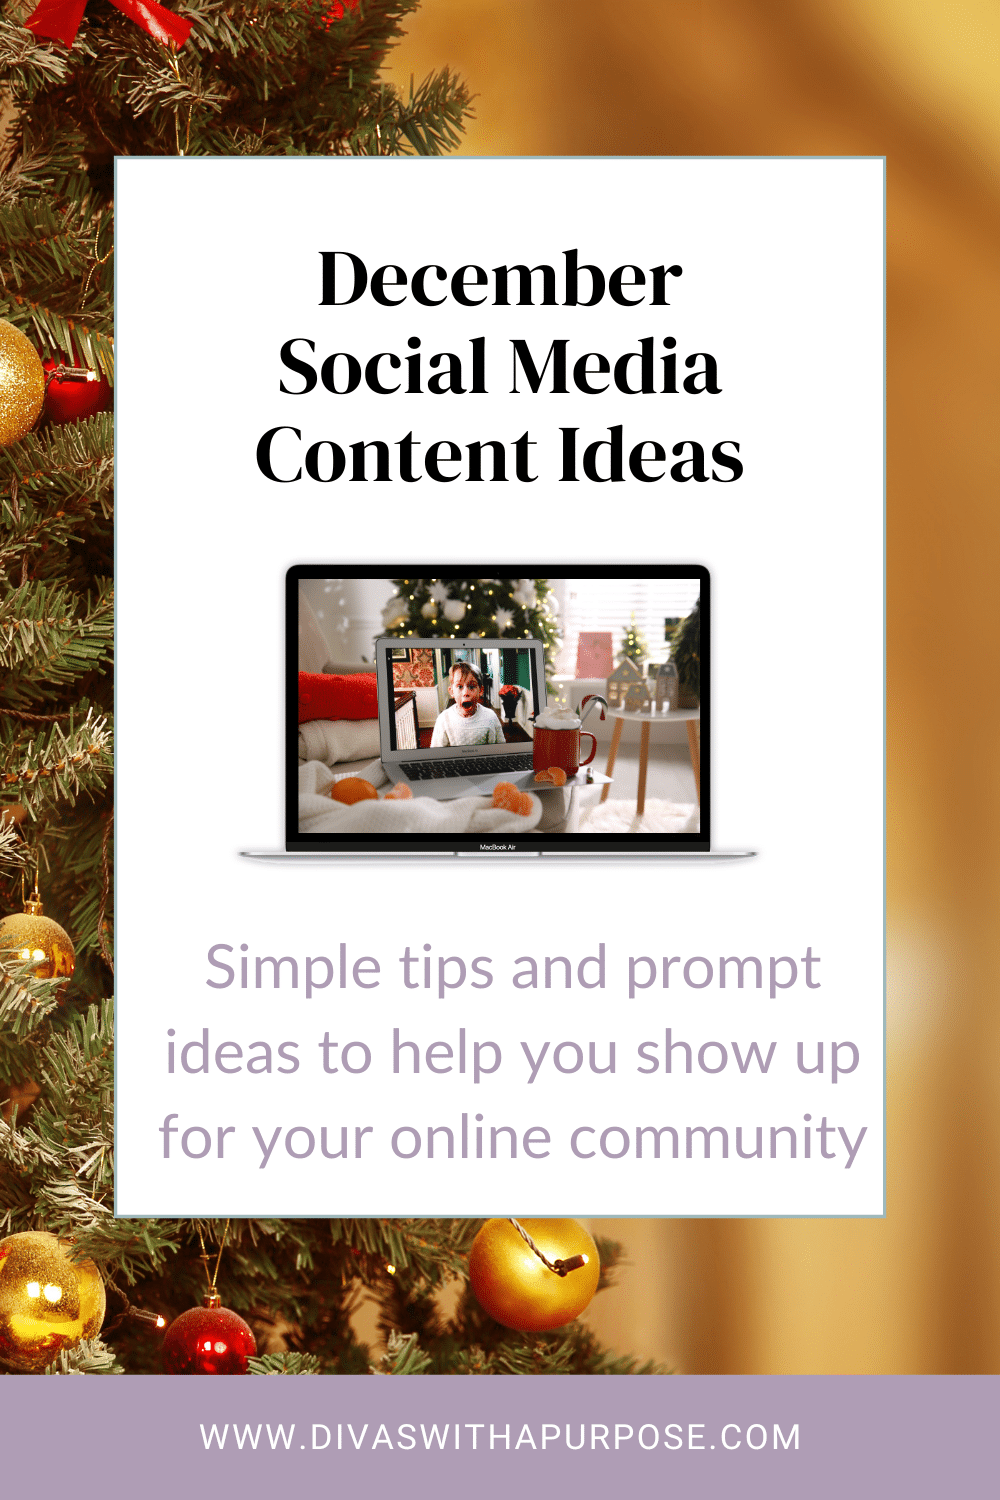 December Social Media Content Ideas - simple tips and prompts to help you show up for your online community